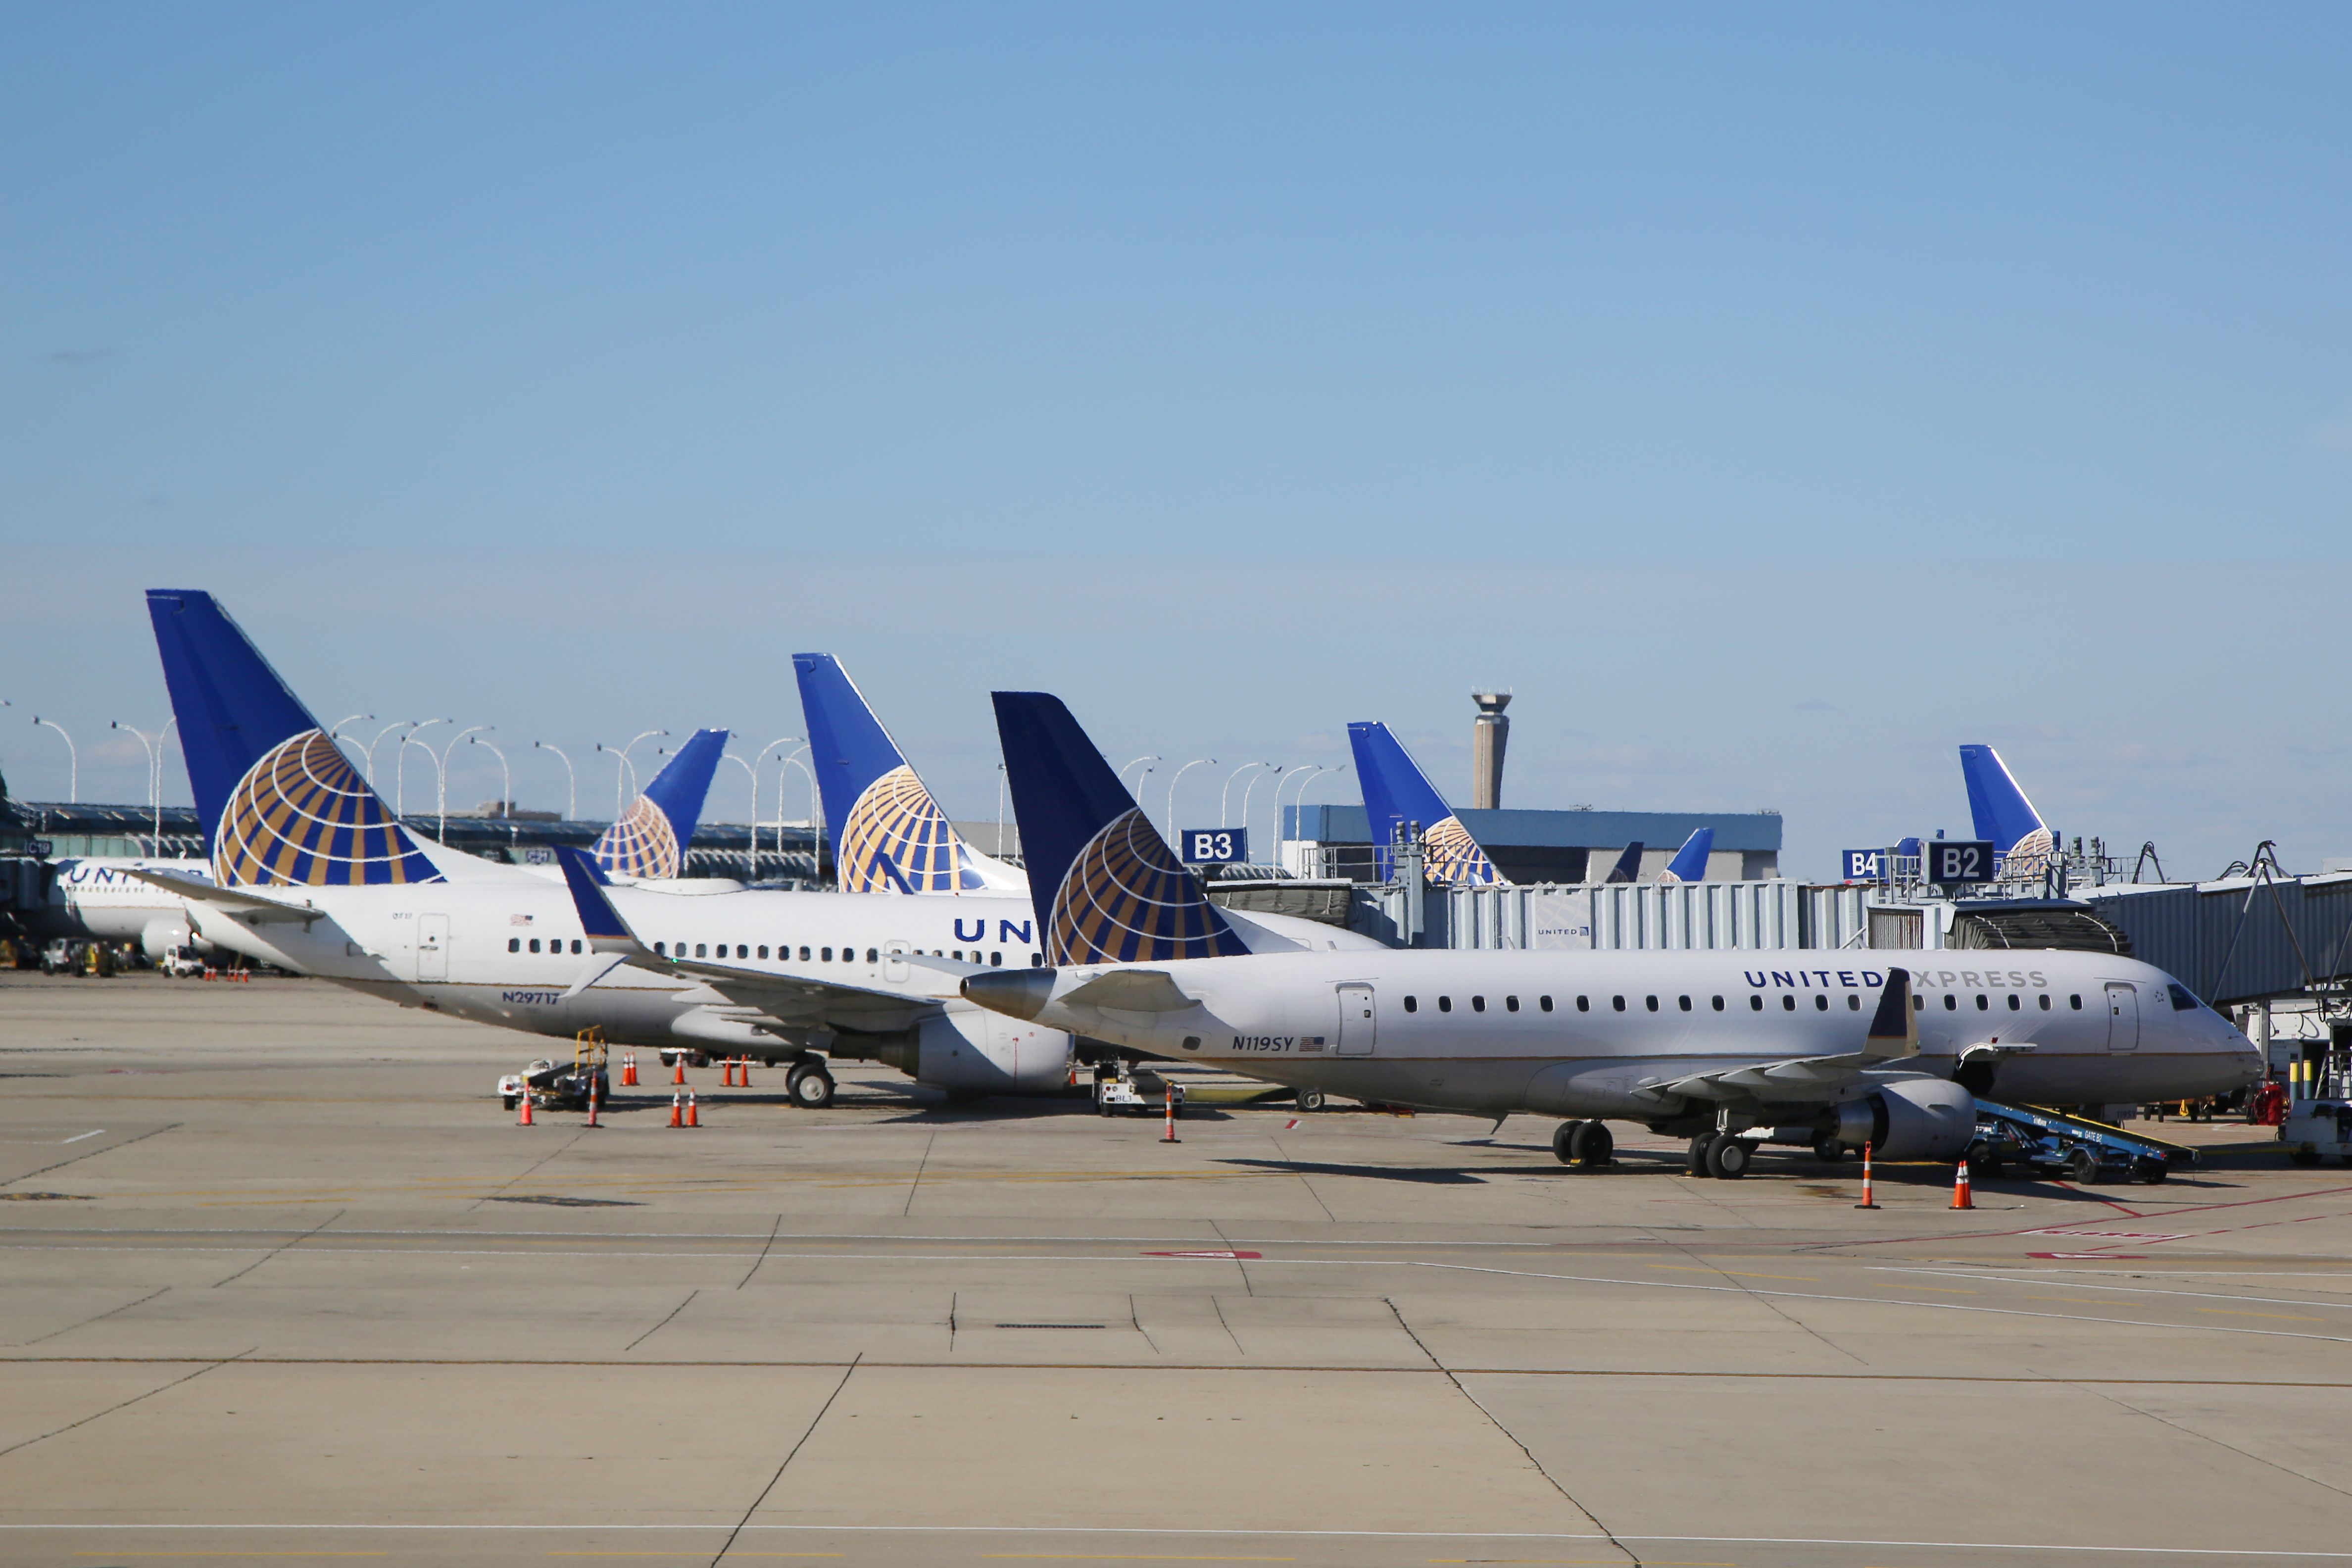 United Aircraft at Chicago Airport